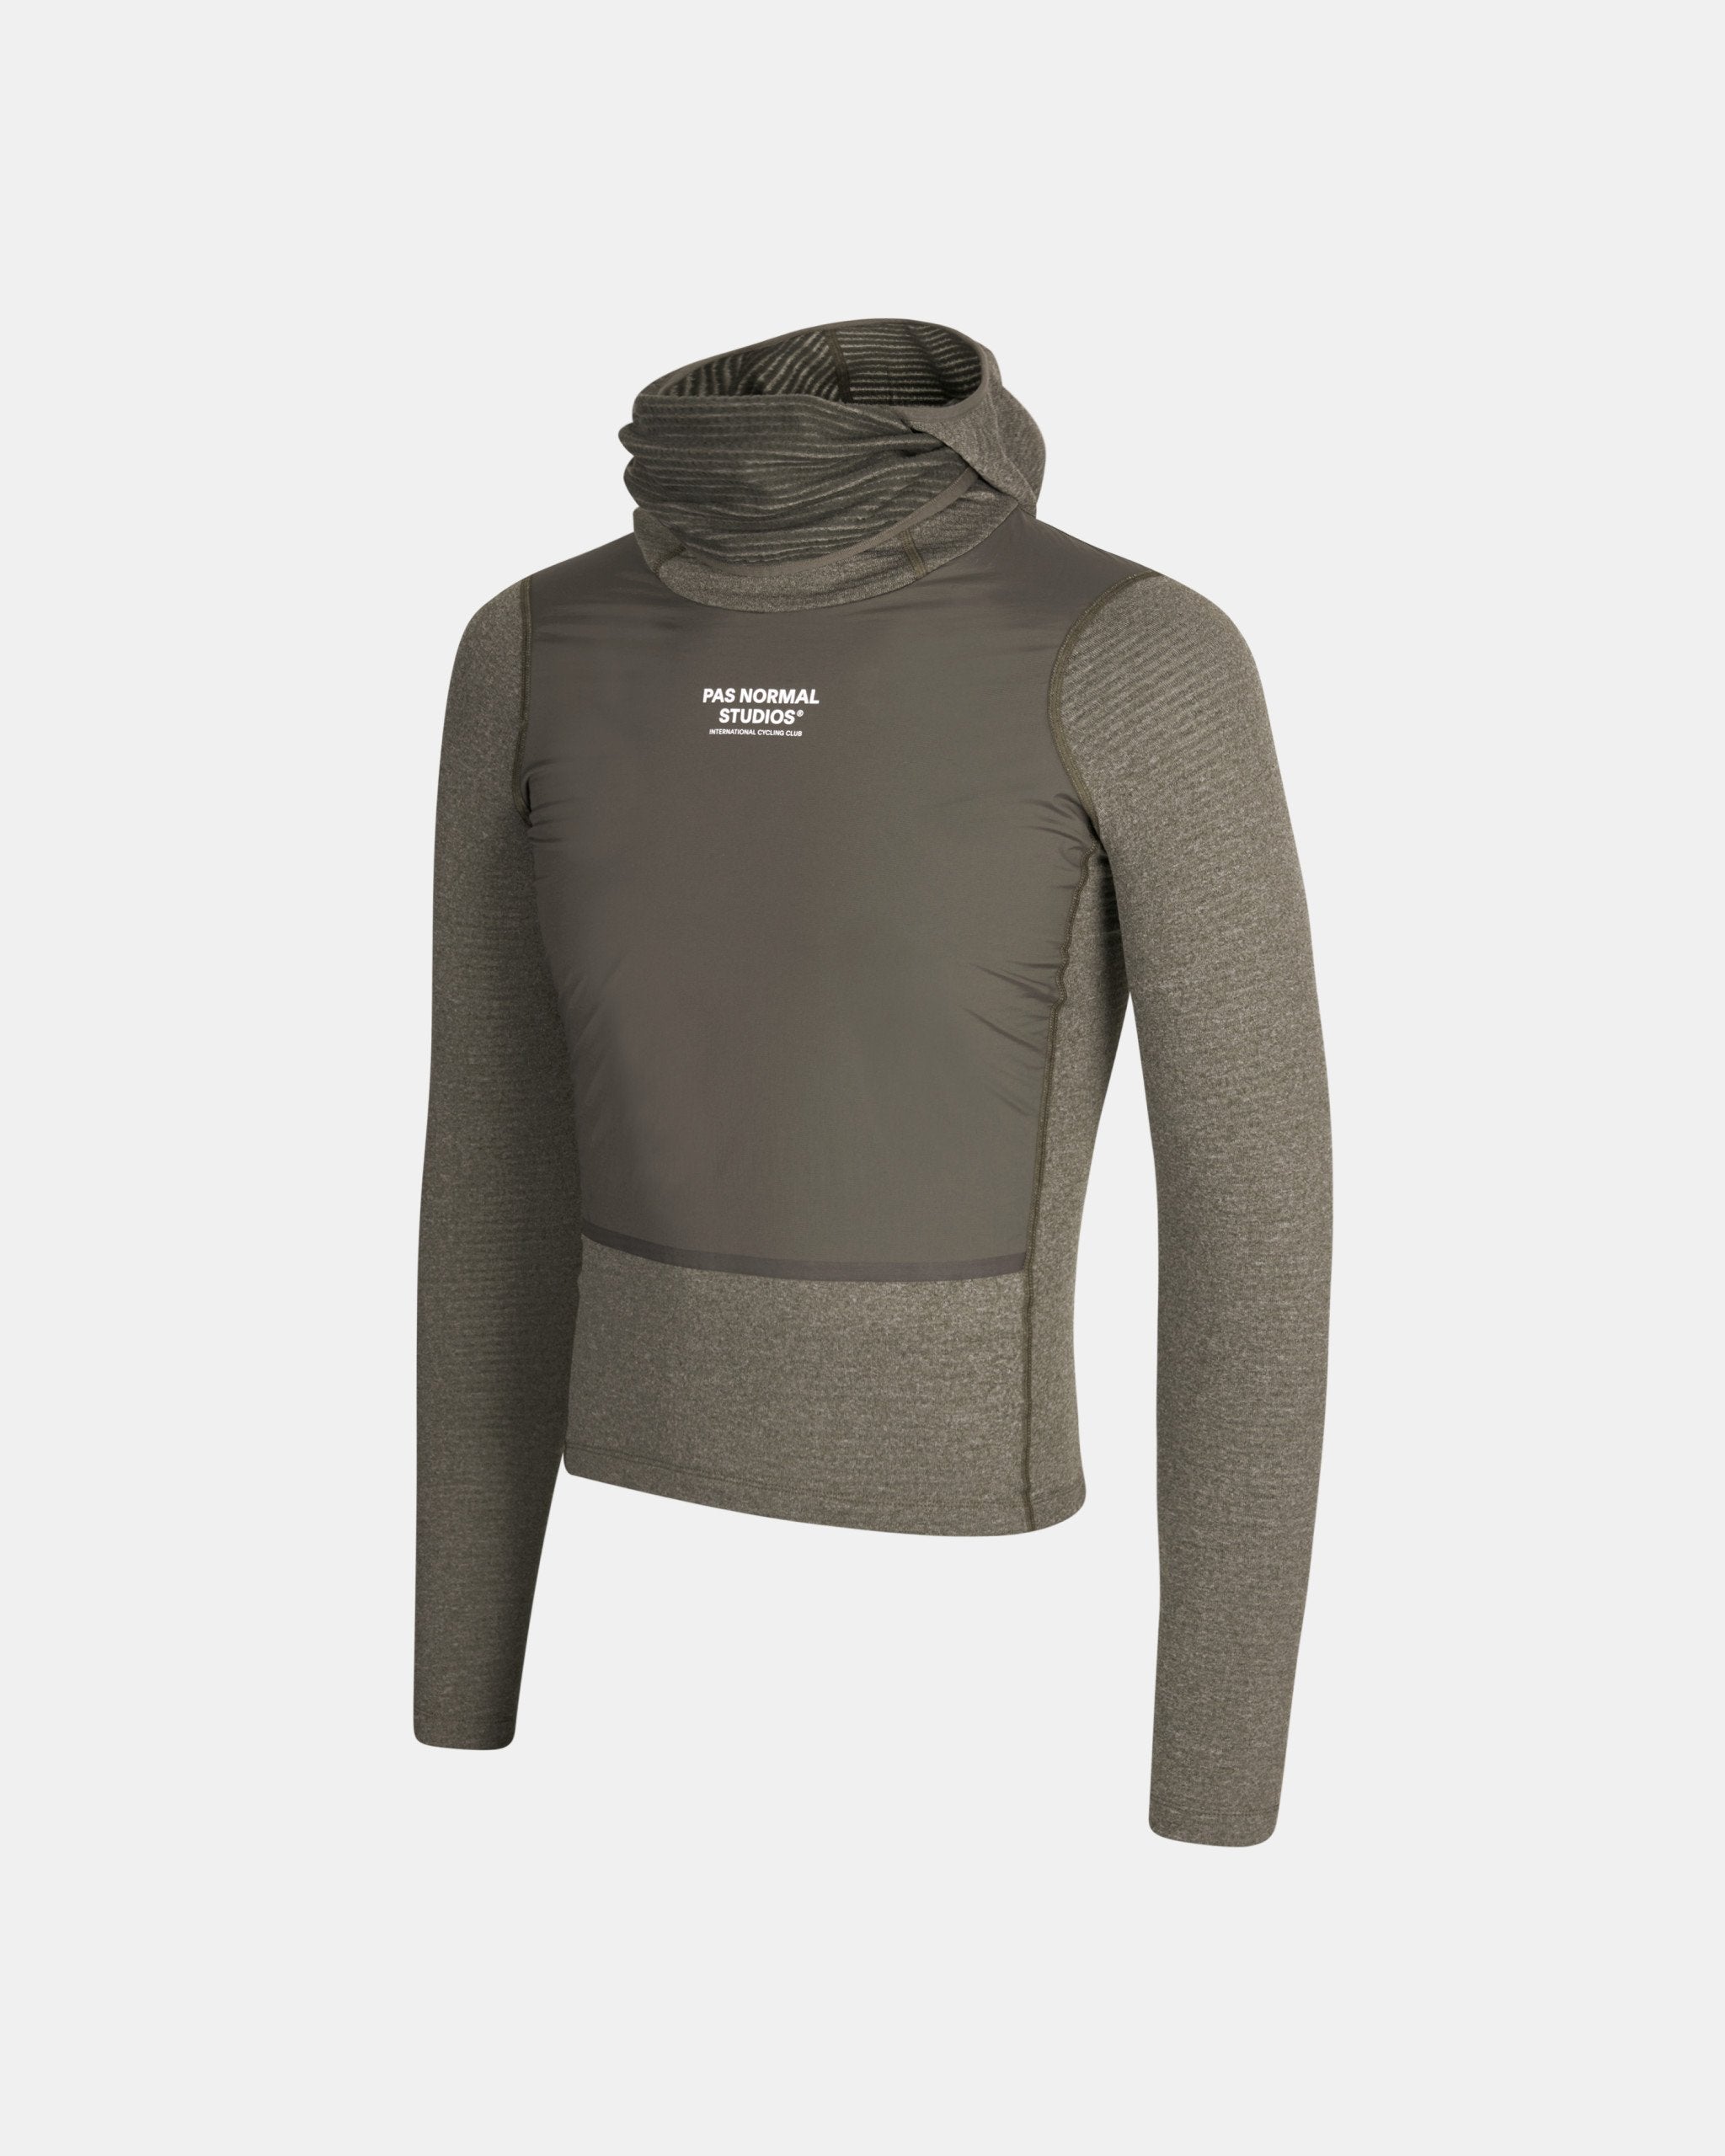 Pas Normal Studios Thermal Hooded Windproof Base Layer - Dark Stone